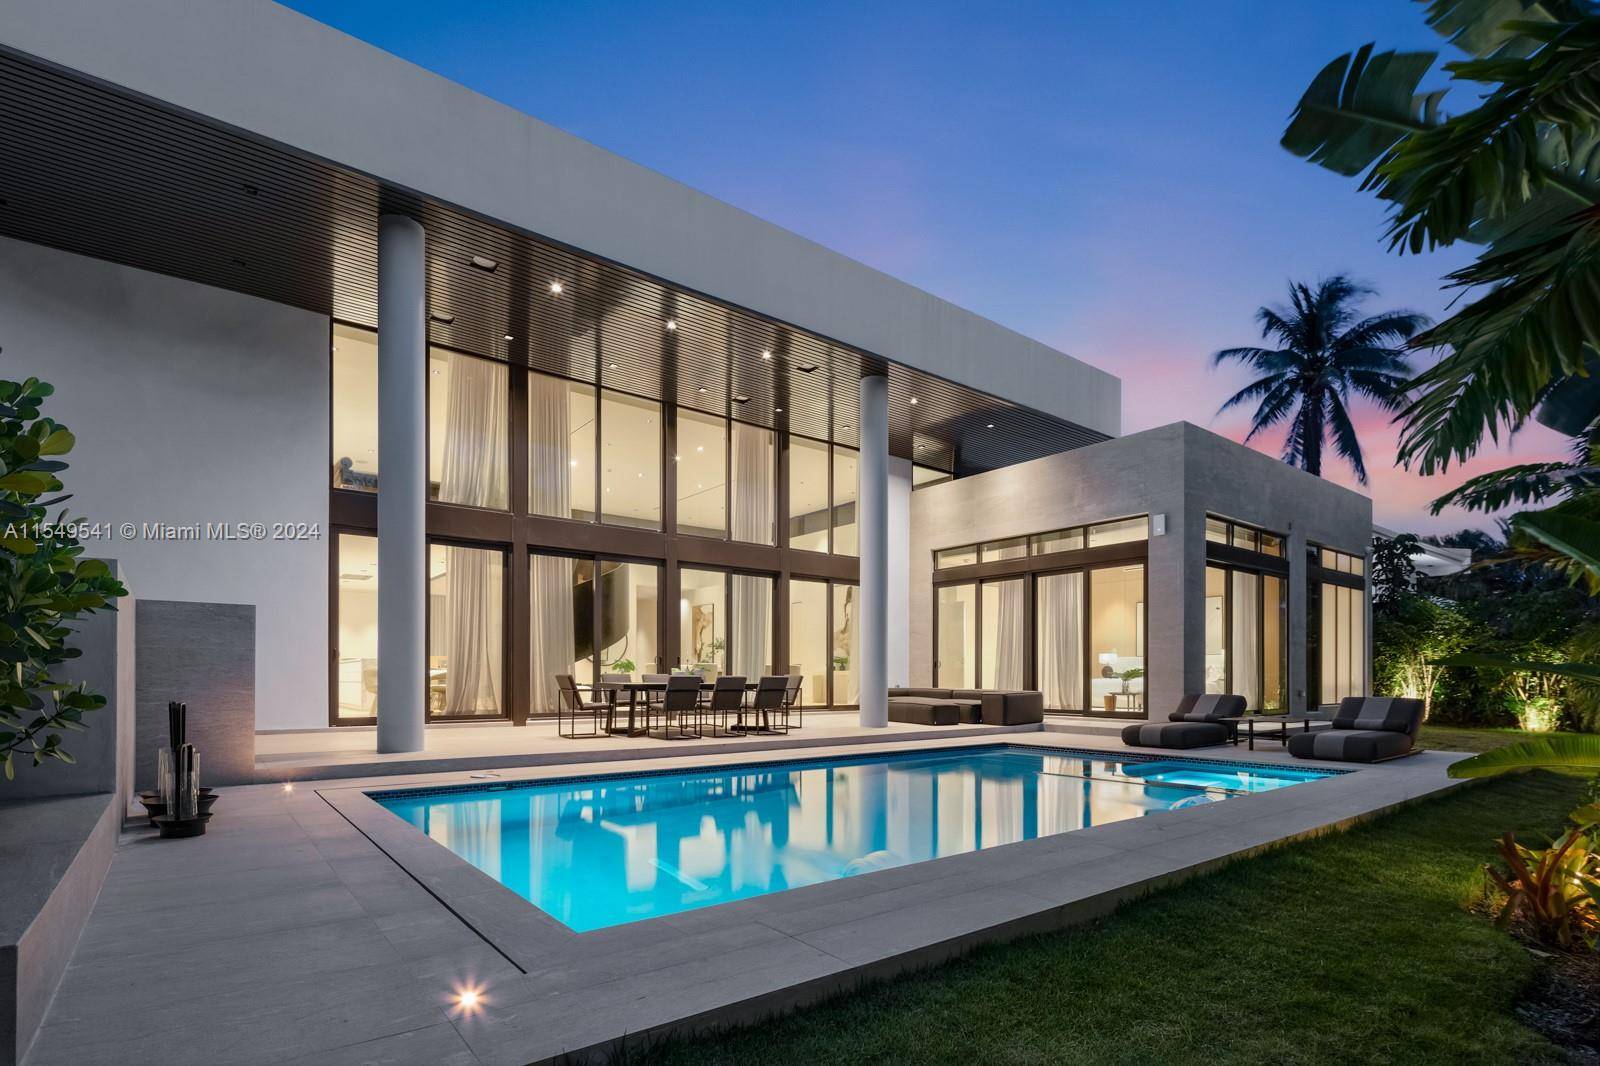 Brand new construction modern masterpiece in the exclusive enclave of Golden Beach.